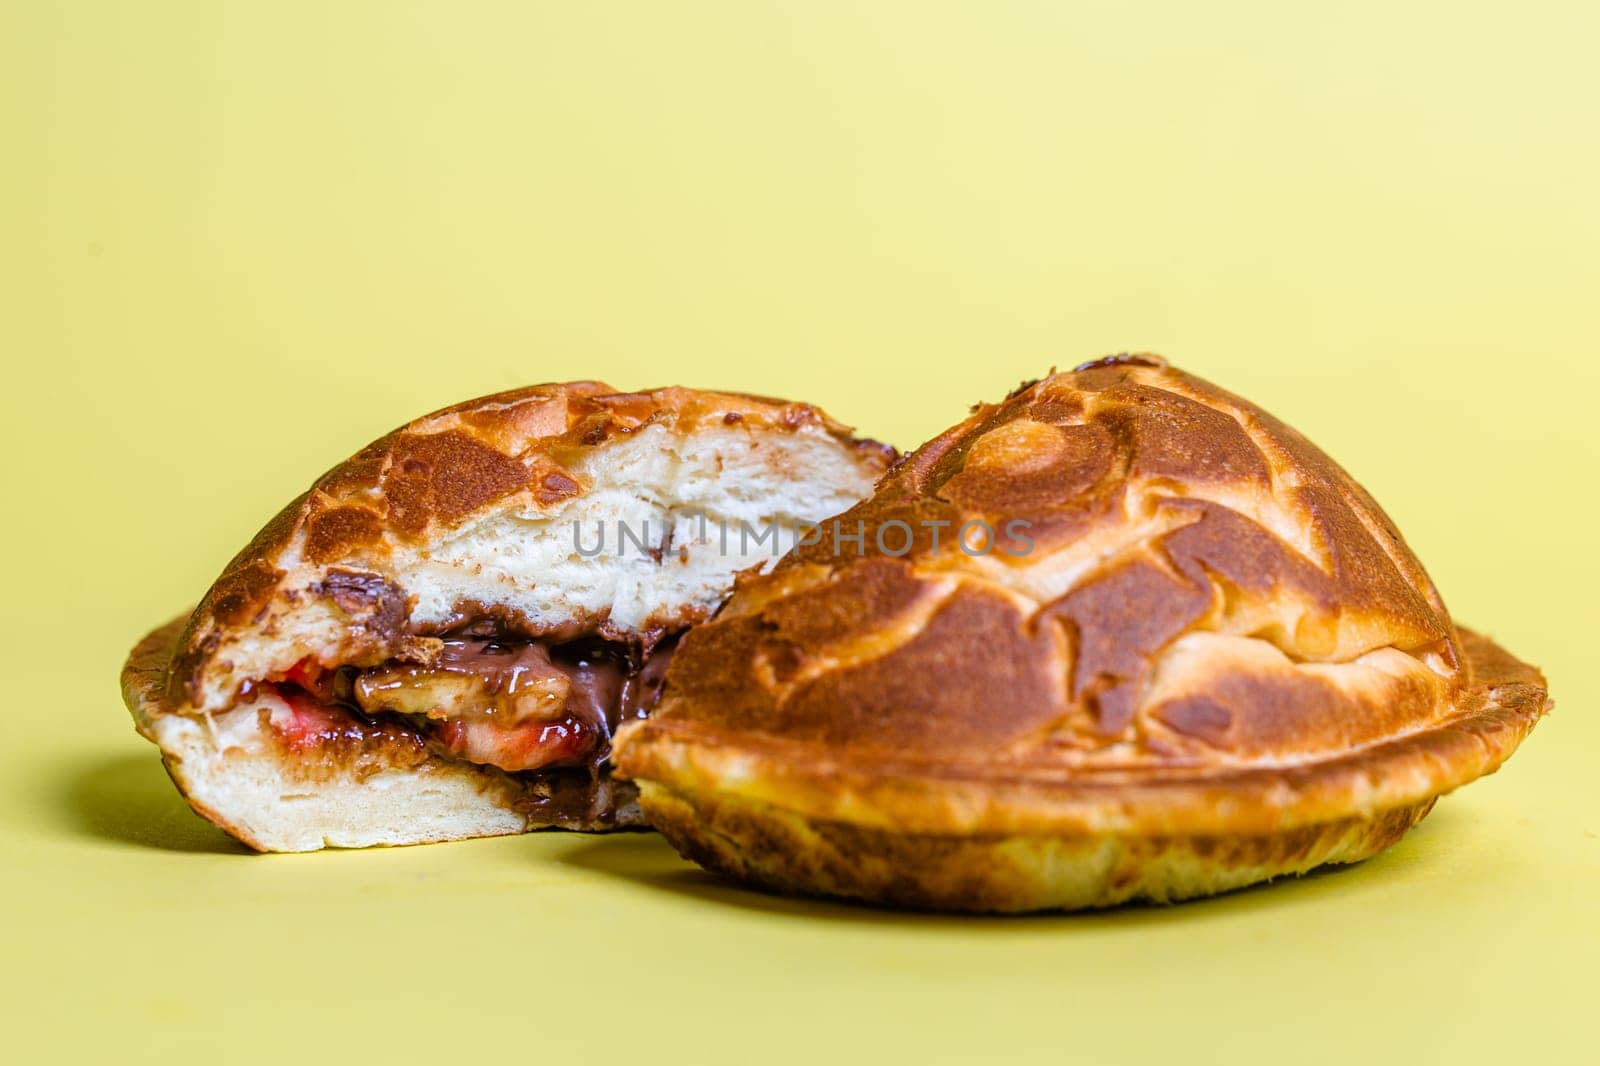 a closed cut burger with juicy filling on a yellow background.